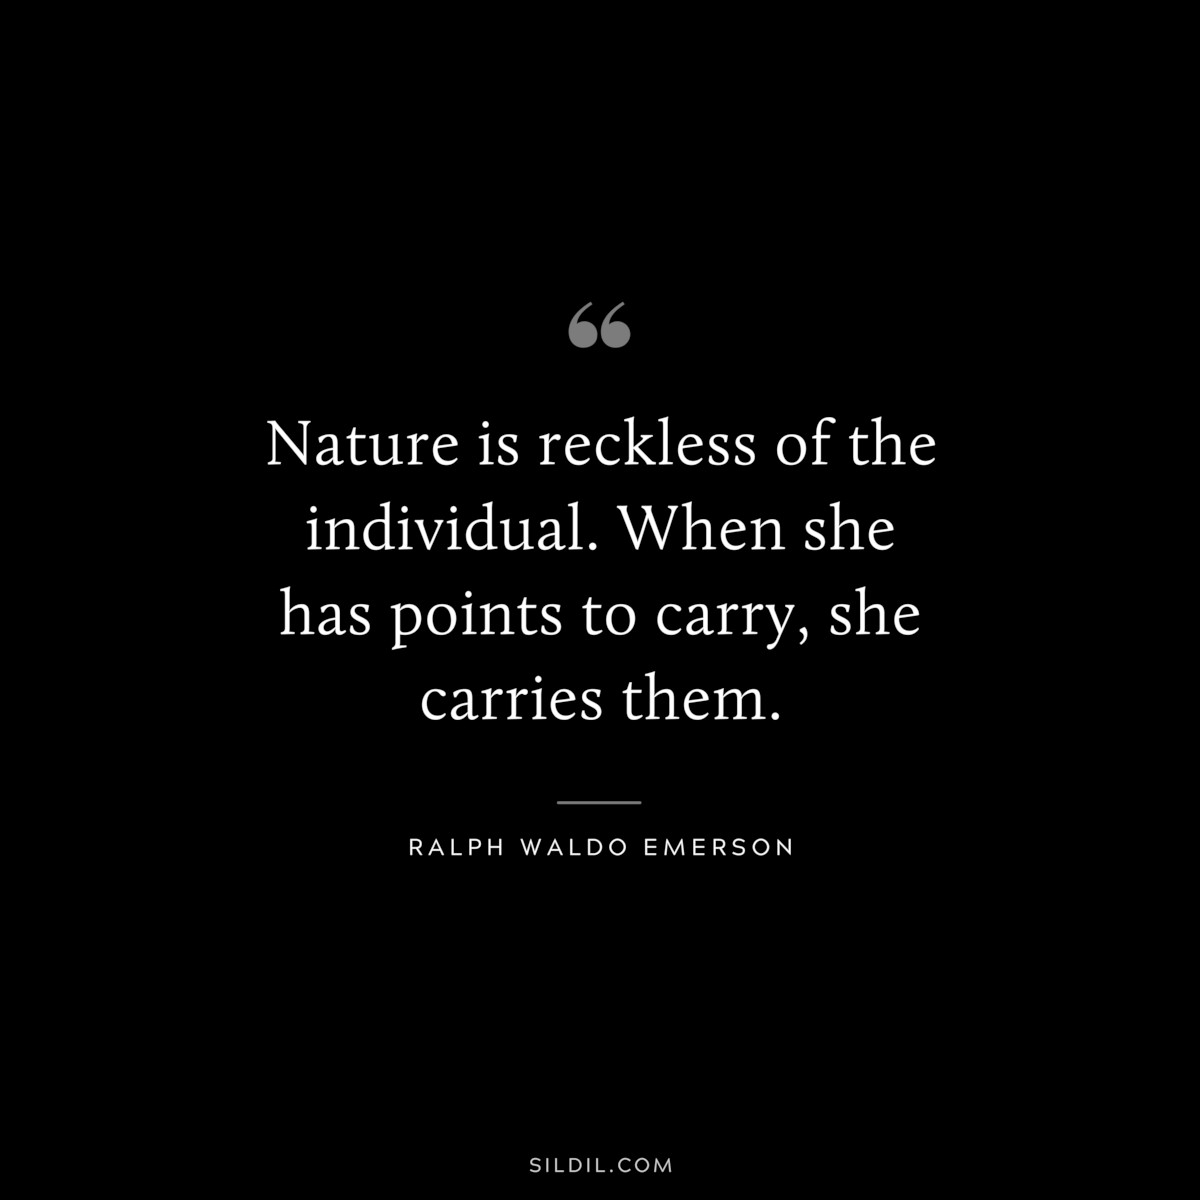 Nature is reckless of the individual. When she has points to carry, she carries them. — Ralph Waldo Emerson